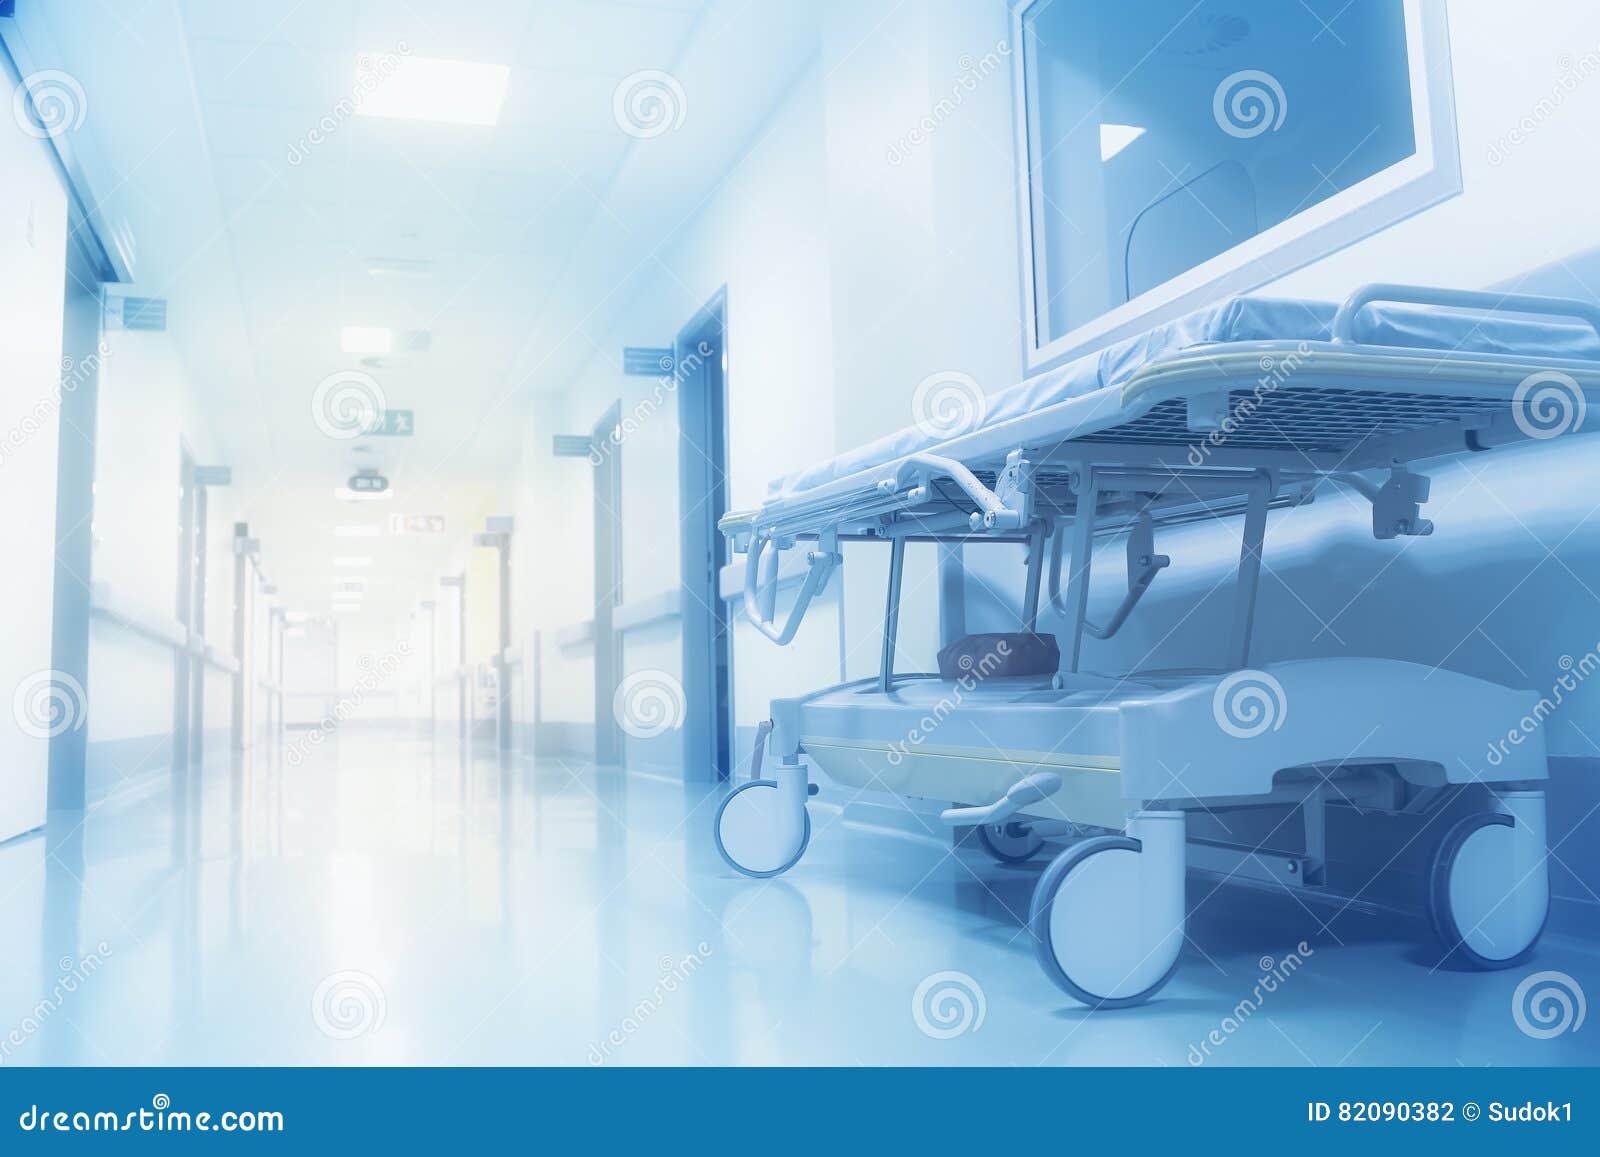 long hospital hallway with space for text